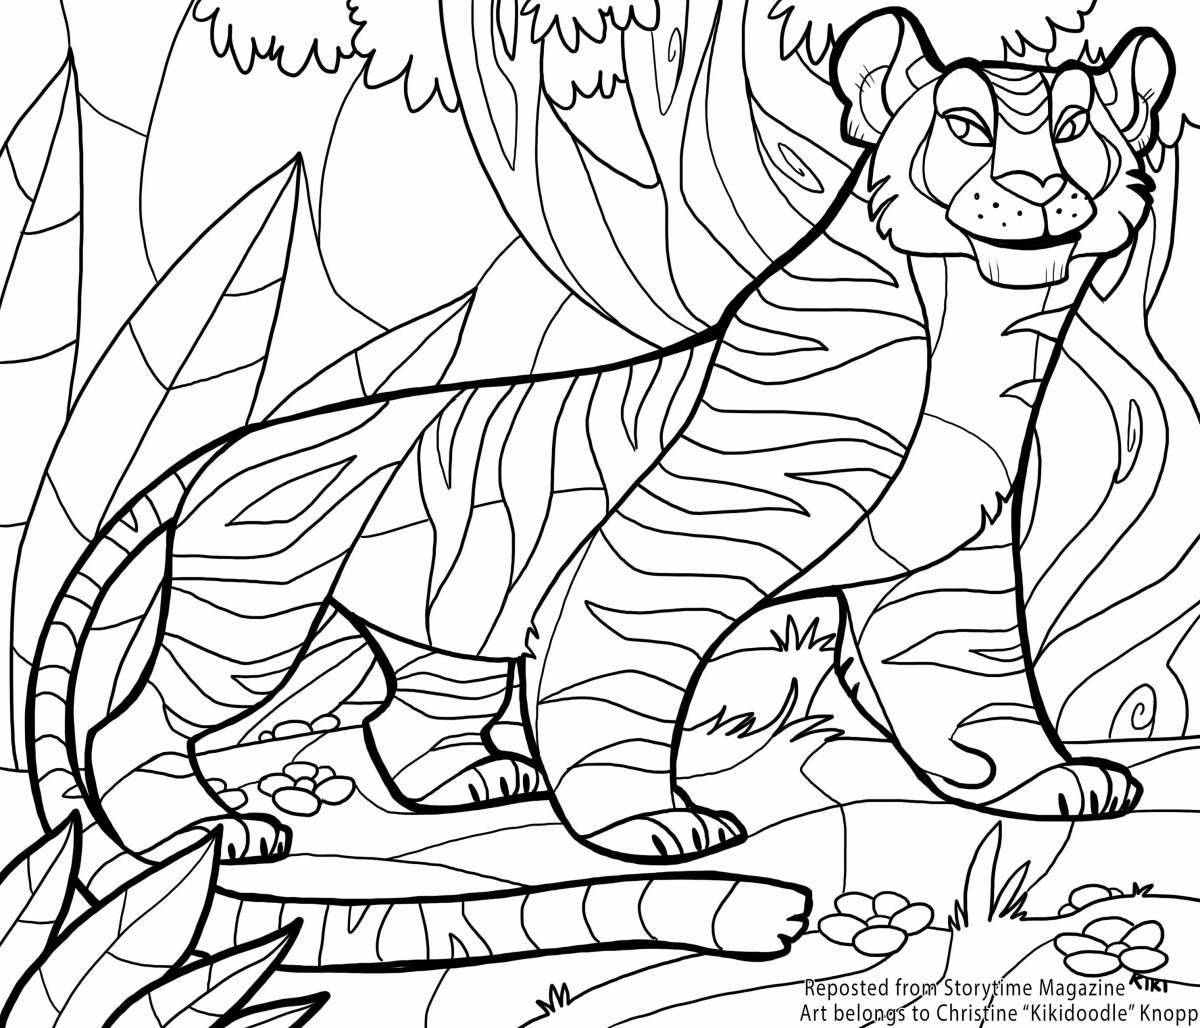 Joyful coloring tiger for children 6-7 years old